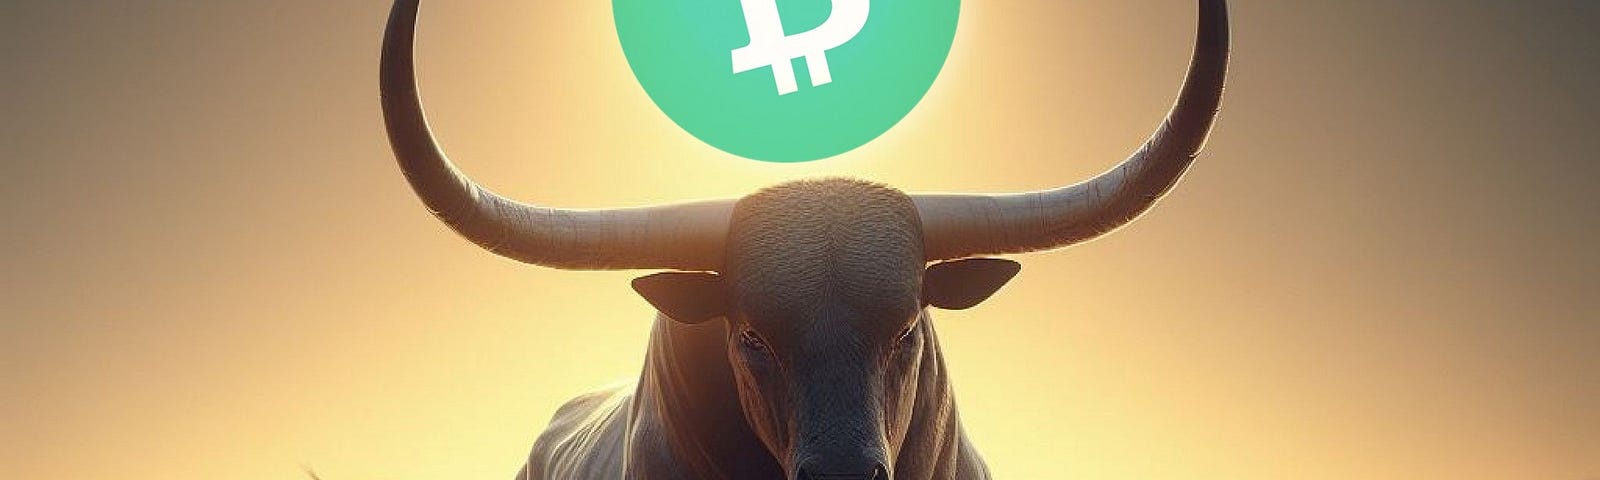 A large, muscular bull in a dynamic pose as if it is charging or running. It is set against a golden field with the lighting suggesting either dawn or dusk, giving the environment a warm glow. The bull’s horns are long and curve upwards. In place of where the bull’s head would typically be, there is a large, green circle featuring the Bitcoin logo in white. The Bitcoin Cash symbol lines through it. The overall scene has an illustrative or digital art quality to it. (description by visionati)